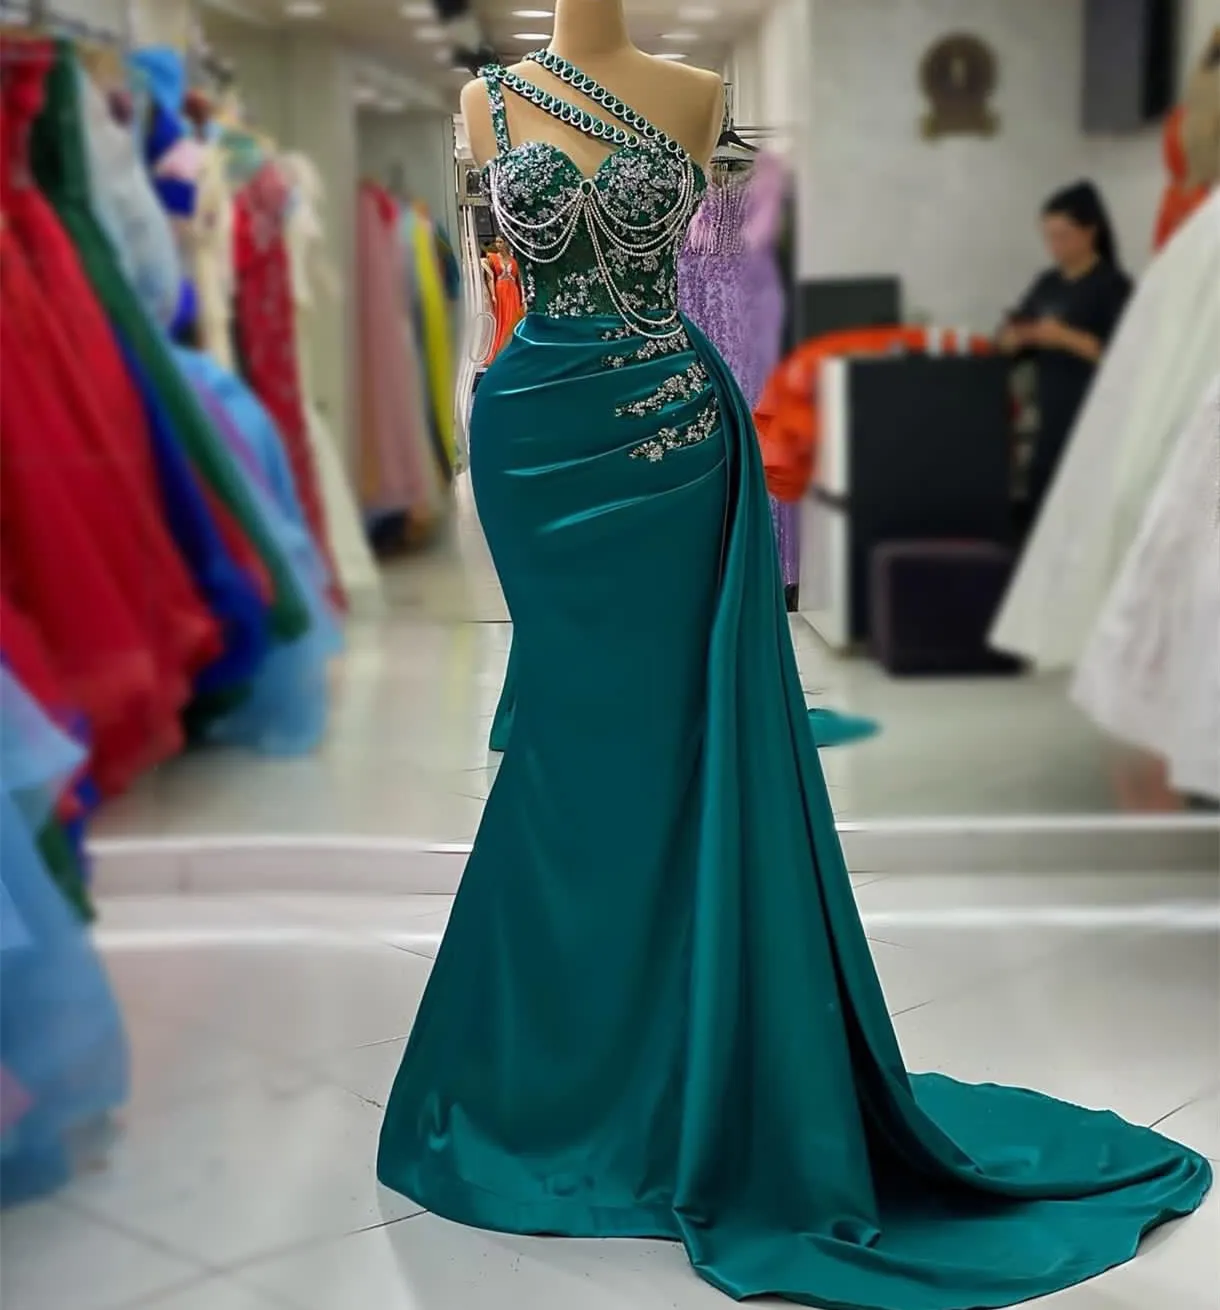 2023 Aso Ebi Arabic Hunter Green Mermaid Prom Dress Crystals Lace Evening Formal Party Second Reception Birthday Engagement Gowns Dresses Robe De Soiree ZJ732